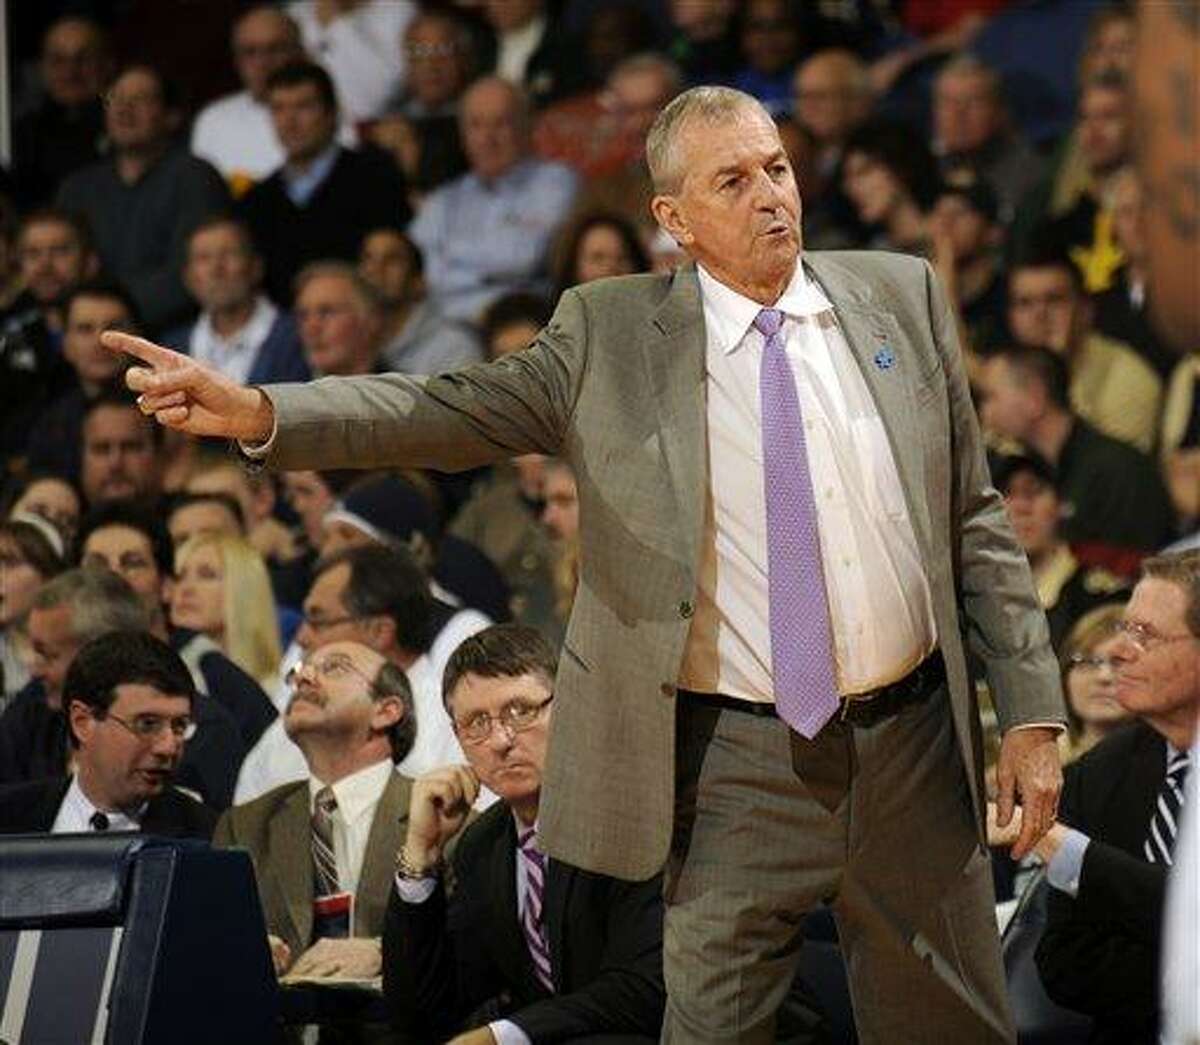 Connecticut coach Jim Calhoun reacts to a call in the second half in a NCAA college basketball game against Notre Dame, Saturday, Jan. 14, 2012, in South Bend, Ind. Connecticut won 67-53. (AP Photo/Joe Raymond)